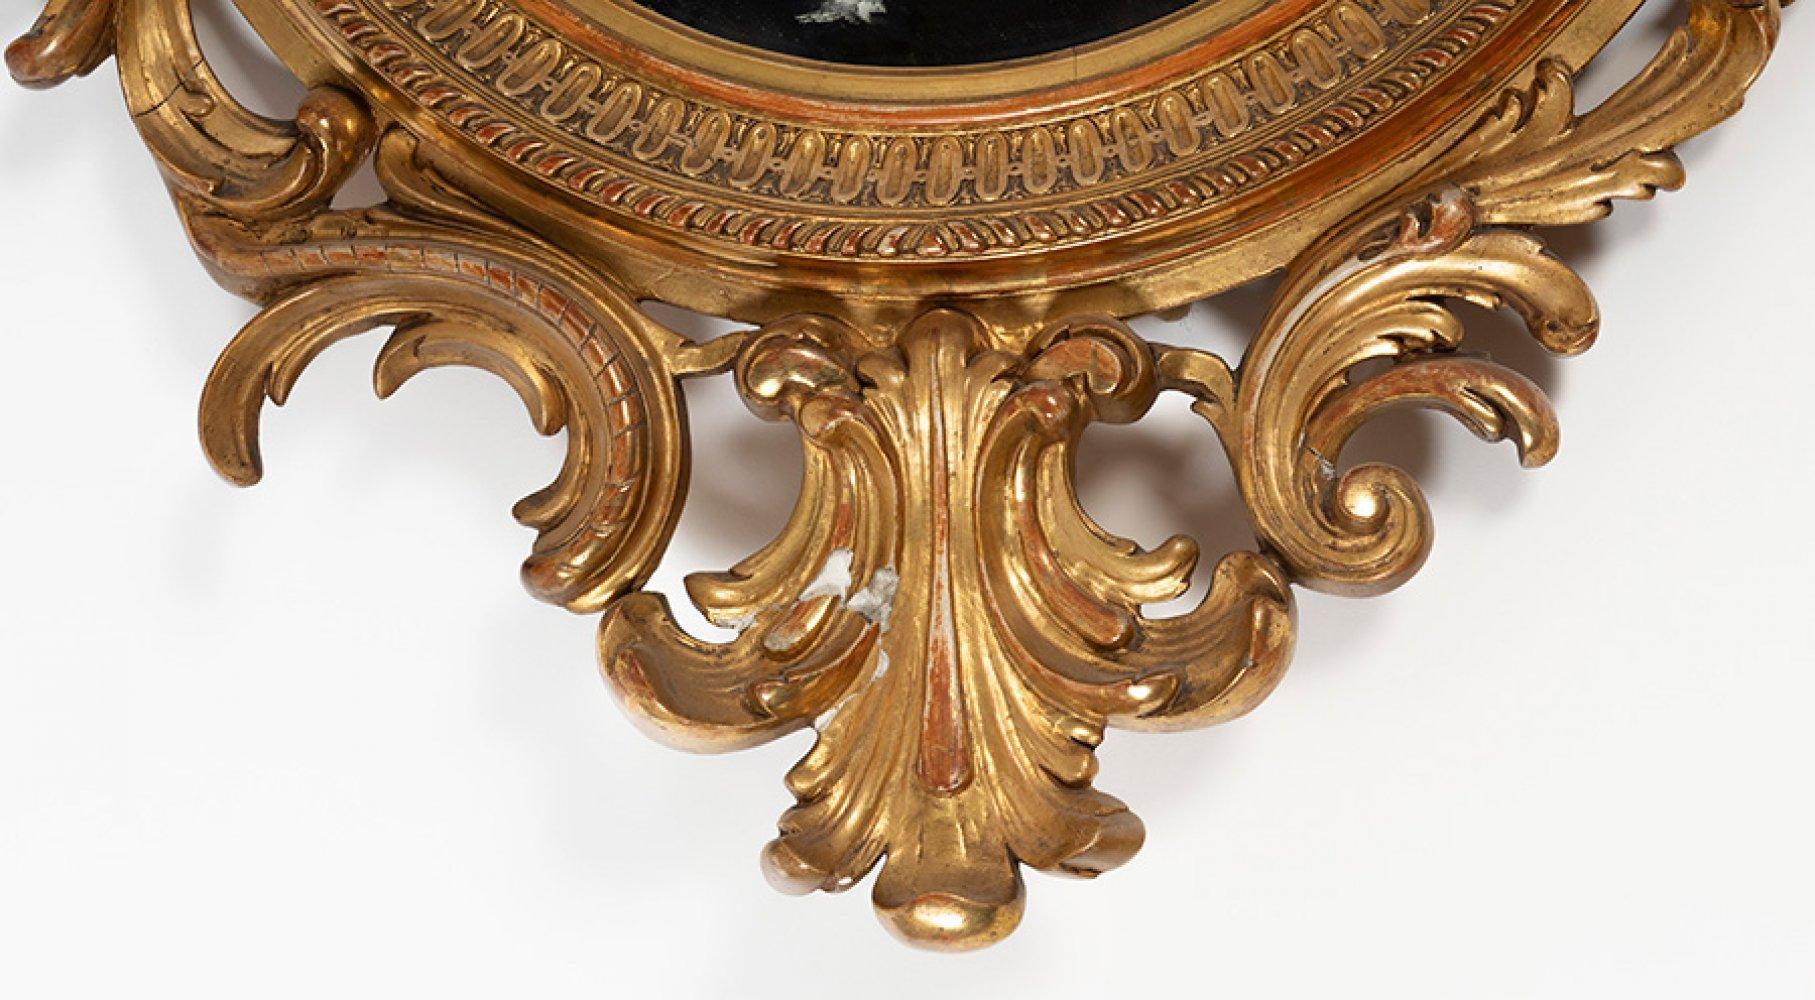 Rococo Revival 19th century French Empire Circular Mirror in Giltwood frame For Sale